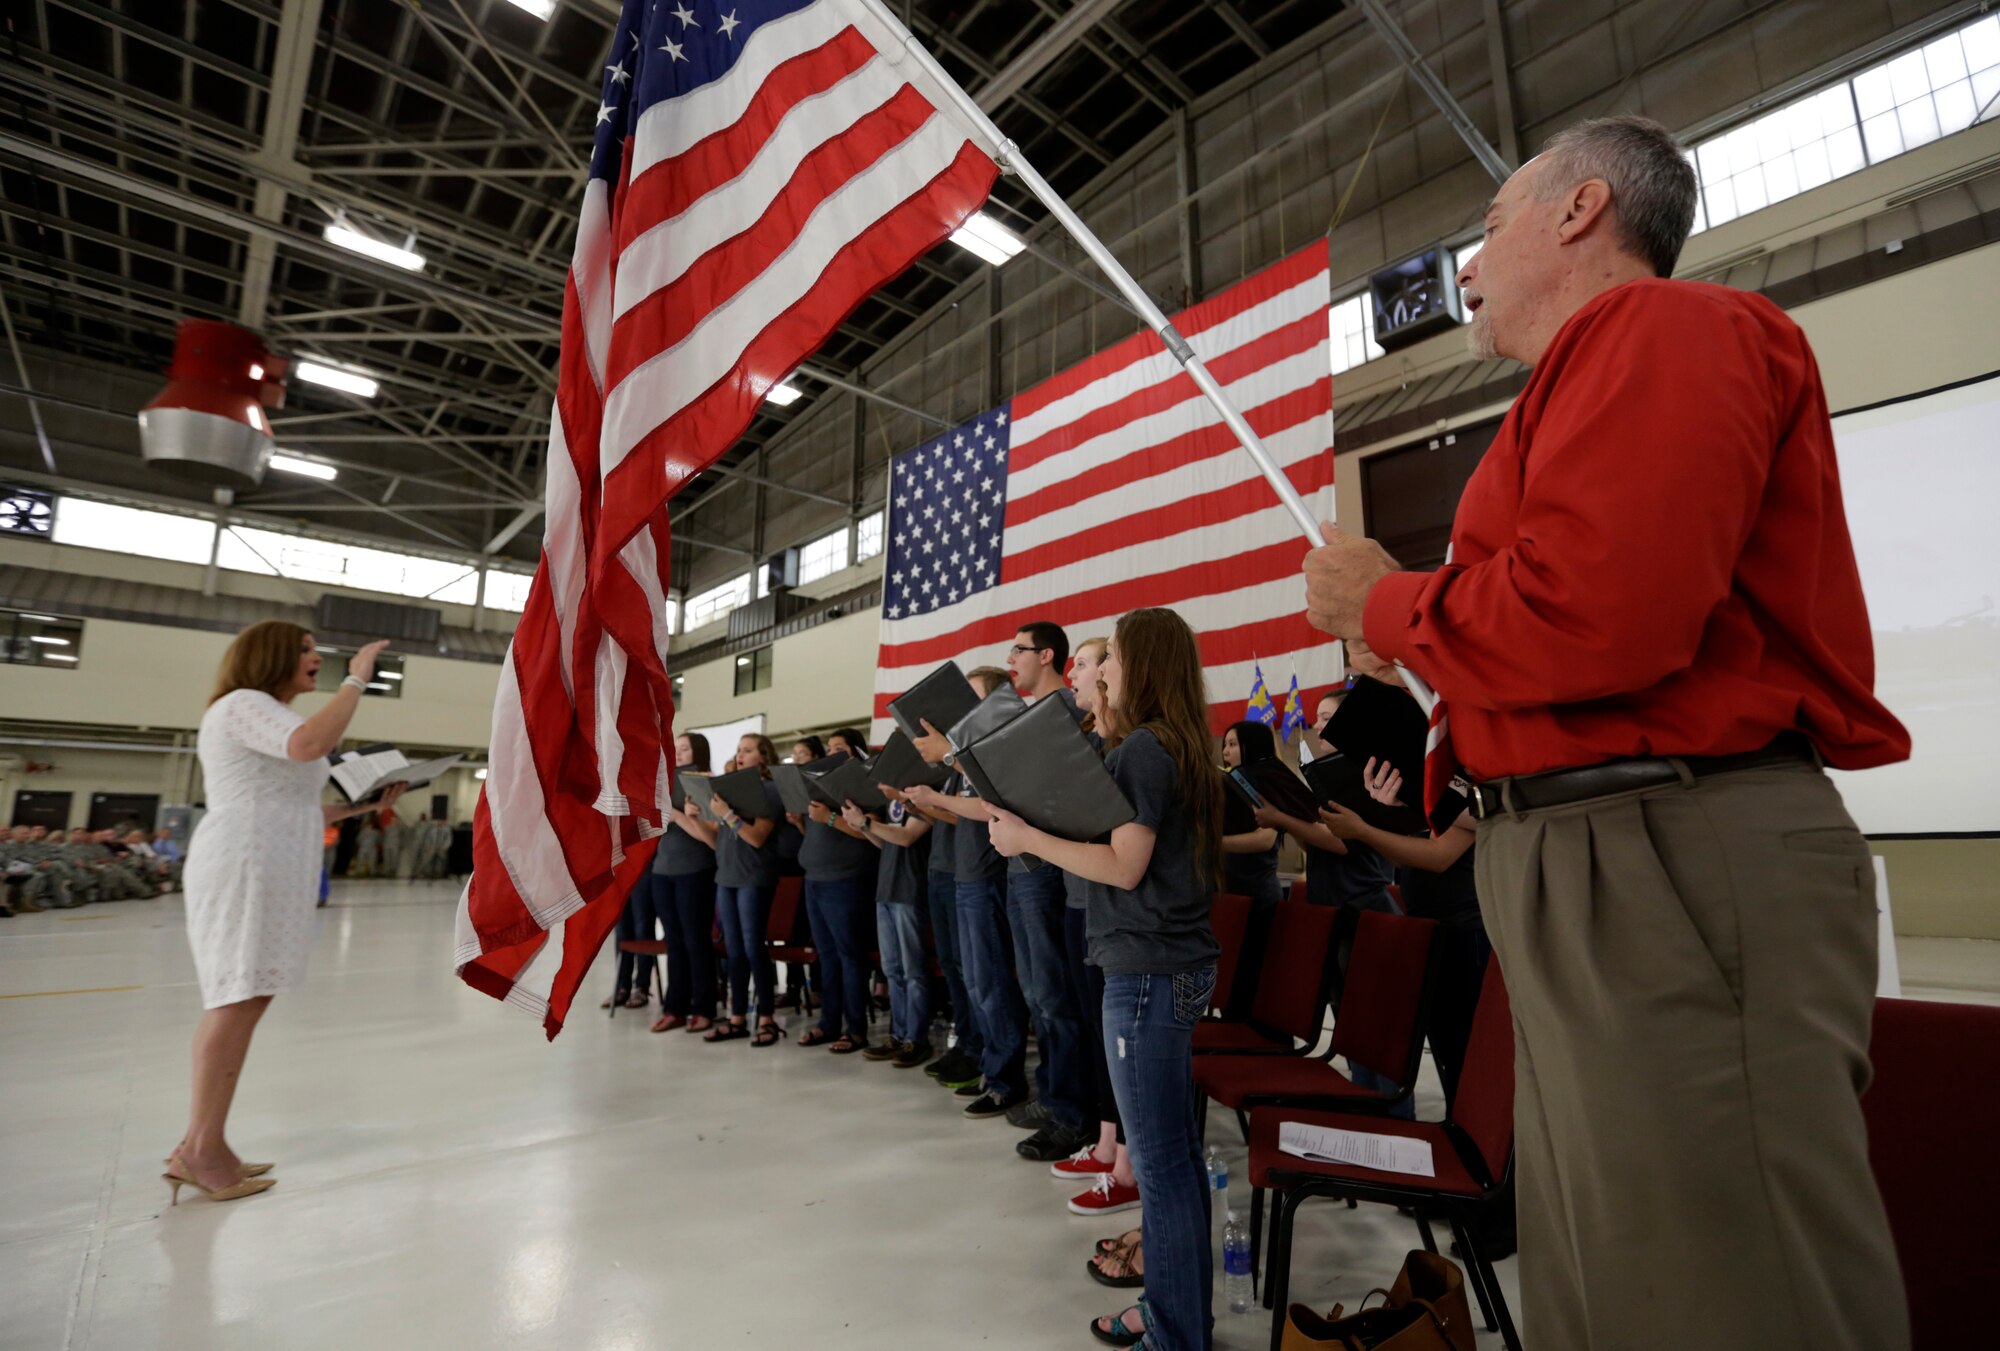 The Fort Smith Southside High School choir accompanied by Dave Burns performs “America the Beautiful” during a Conversion Day ceremony at Ebbing Air National Guard Base, Fort Smith, Arkansas, June 7, 2014. The ceremony recognized the many changes occurring at the 188th Wing as a result of its conversion to a remotely piloted aircraft (MQ-9 Reapers) and intelligence, surveillance and reconnaissance mission. (U.S. Air National Guard photo by Master Sgt. Mark Moore)